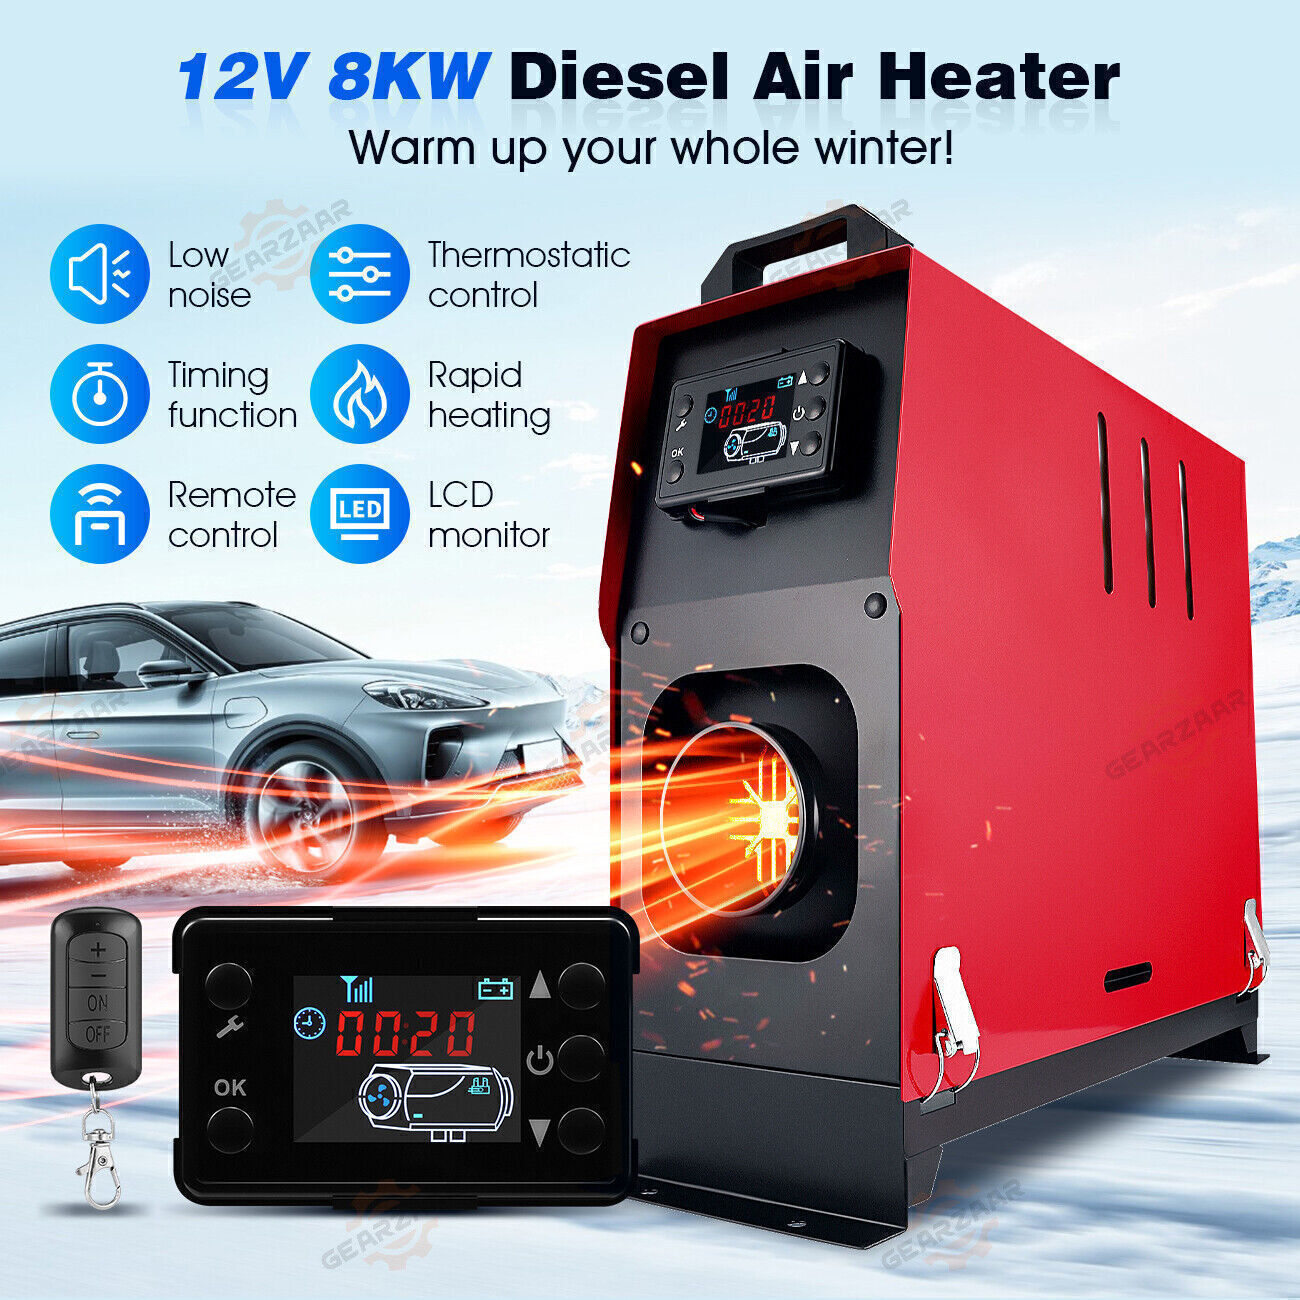 Gearzaar Diesel Air Heater All in one 8KW LCD Remote Control For Car RV Indoor